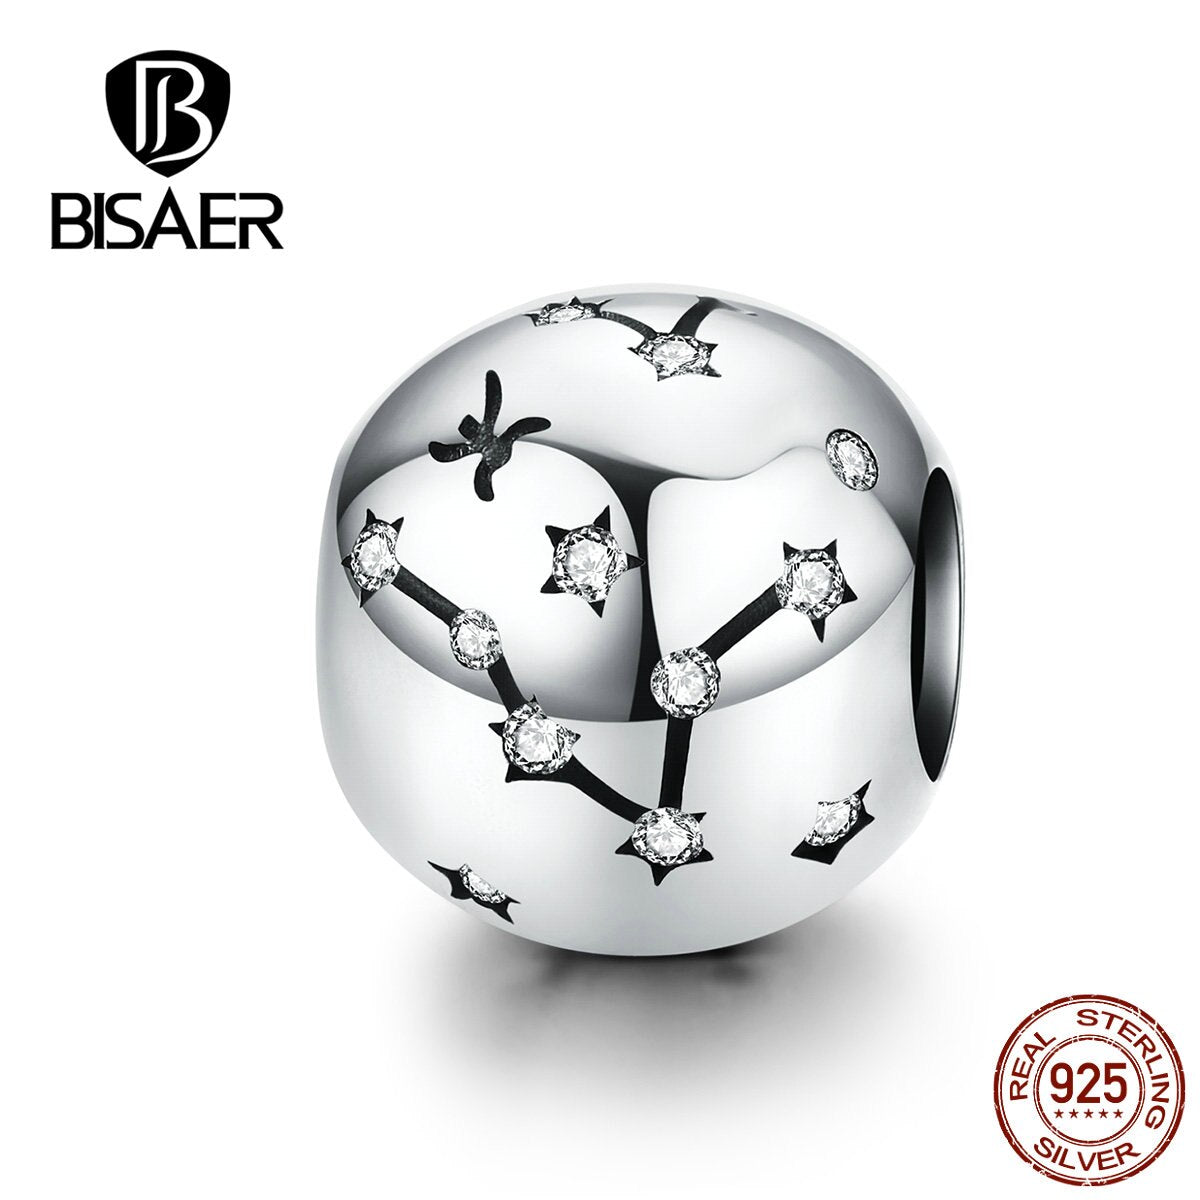 BISAER 925 Sterling Silver Charms Twelve Constellations Star Zircon Beads Charm Pendant Fit Women Bracelets Jewelry Fine GiFt